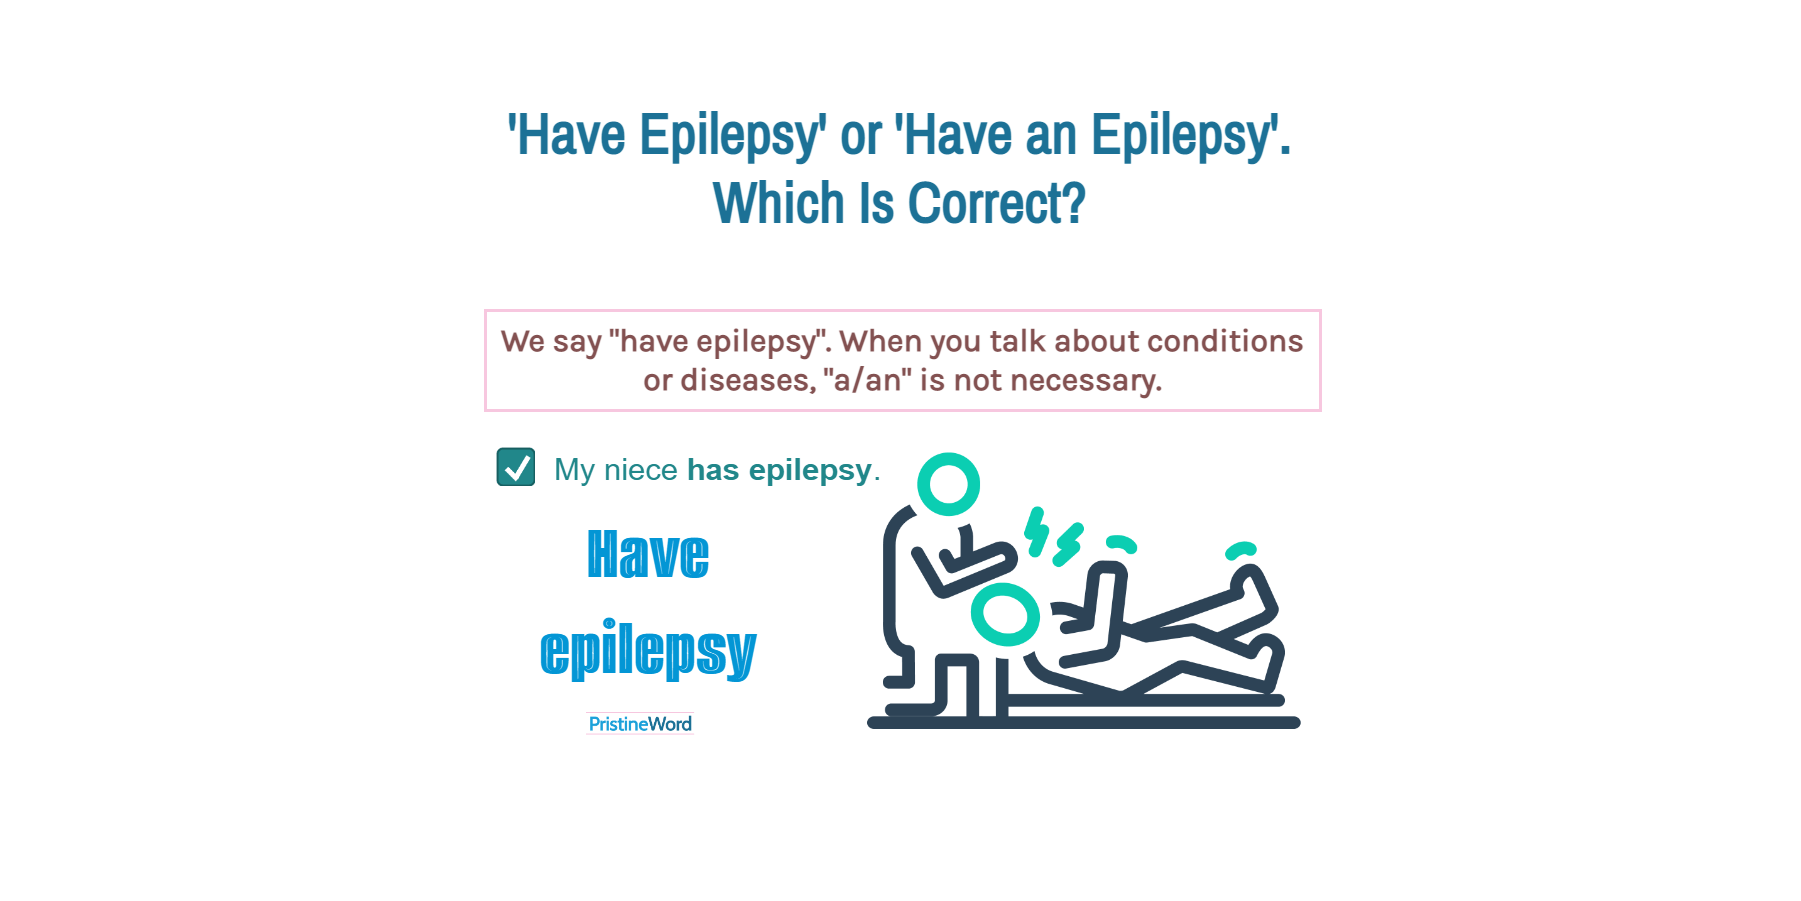 Have Epilepsy or Have an Epilepsy. Which Is Correct?